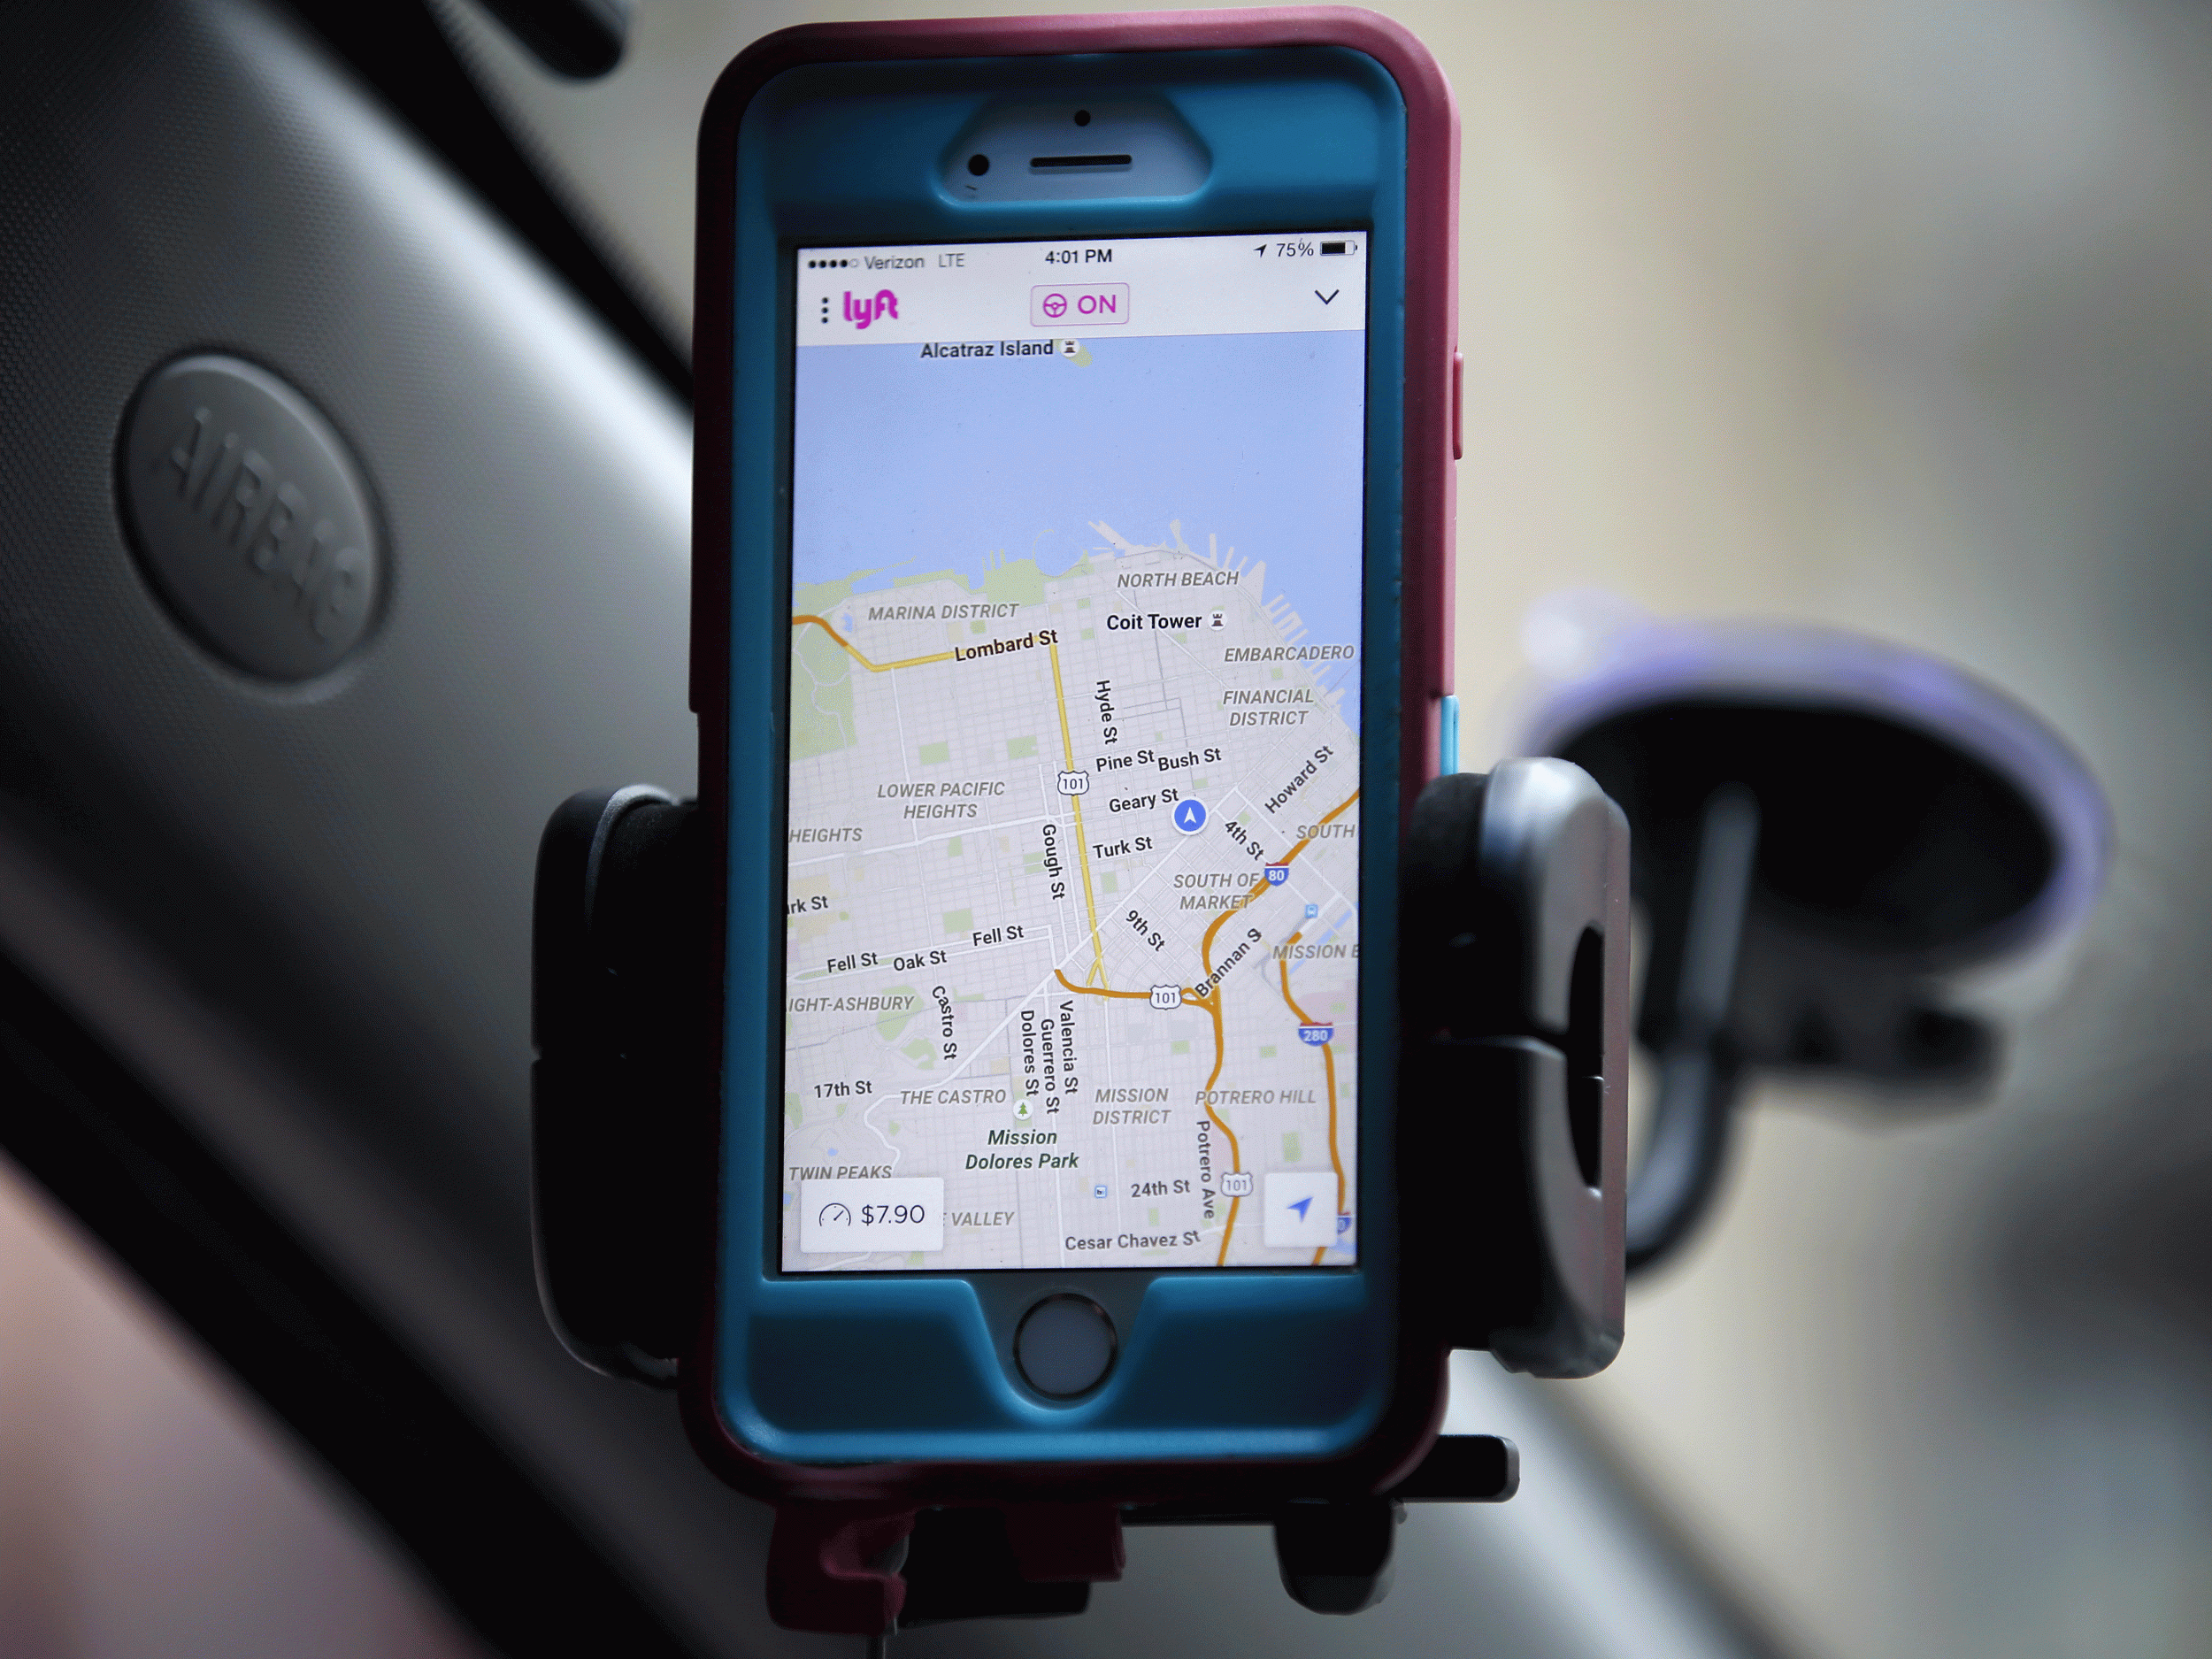 Lyft is being bolstered by the woes at Uber, which has been dealing with scandals involving the company’s workplace culture and aggressive leadership team